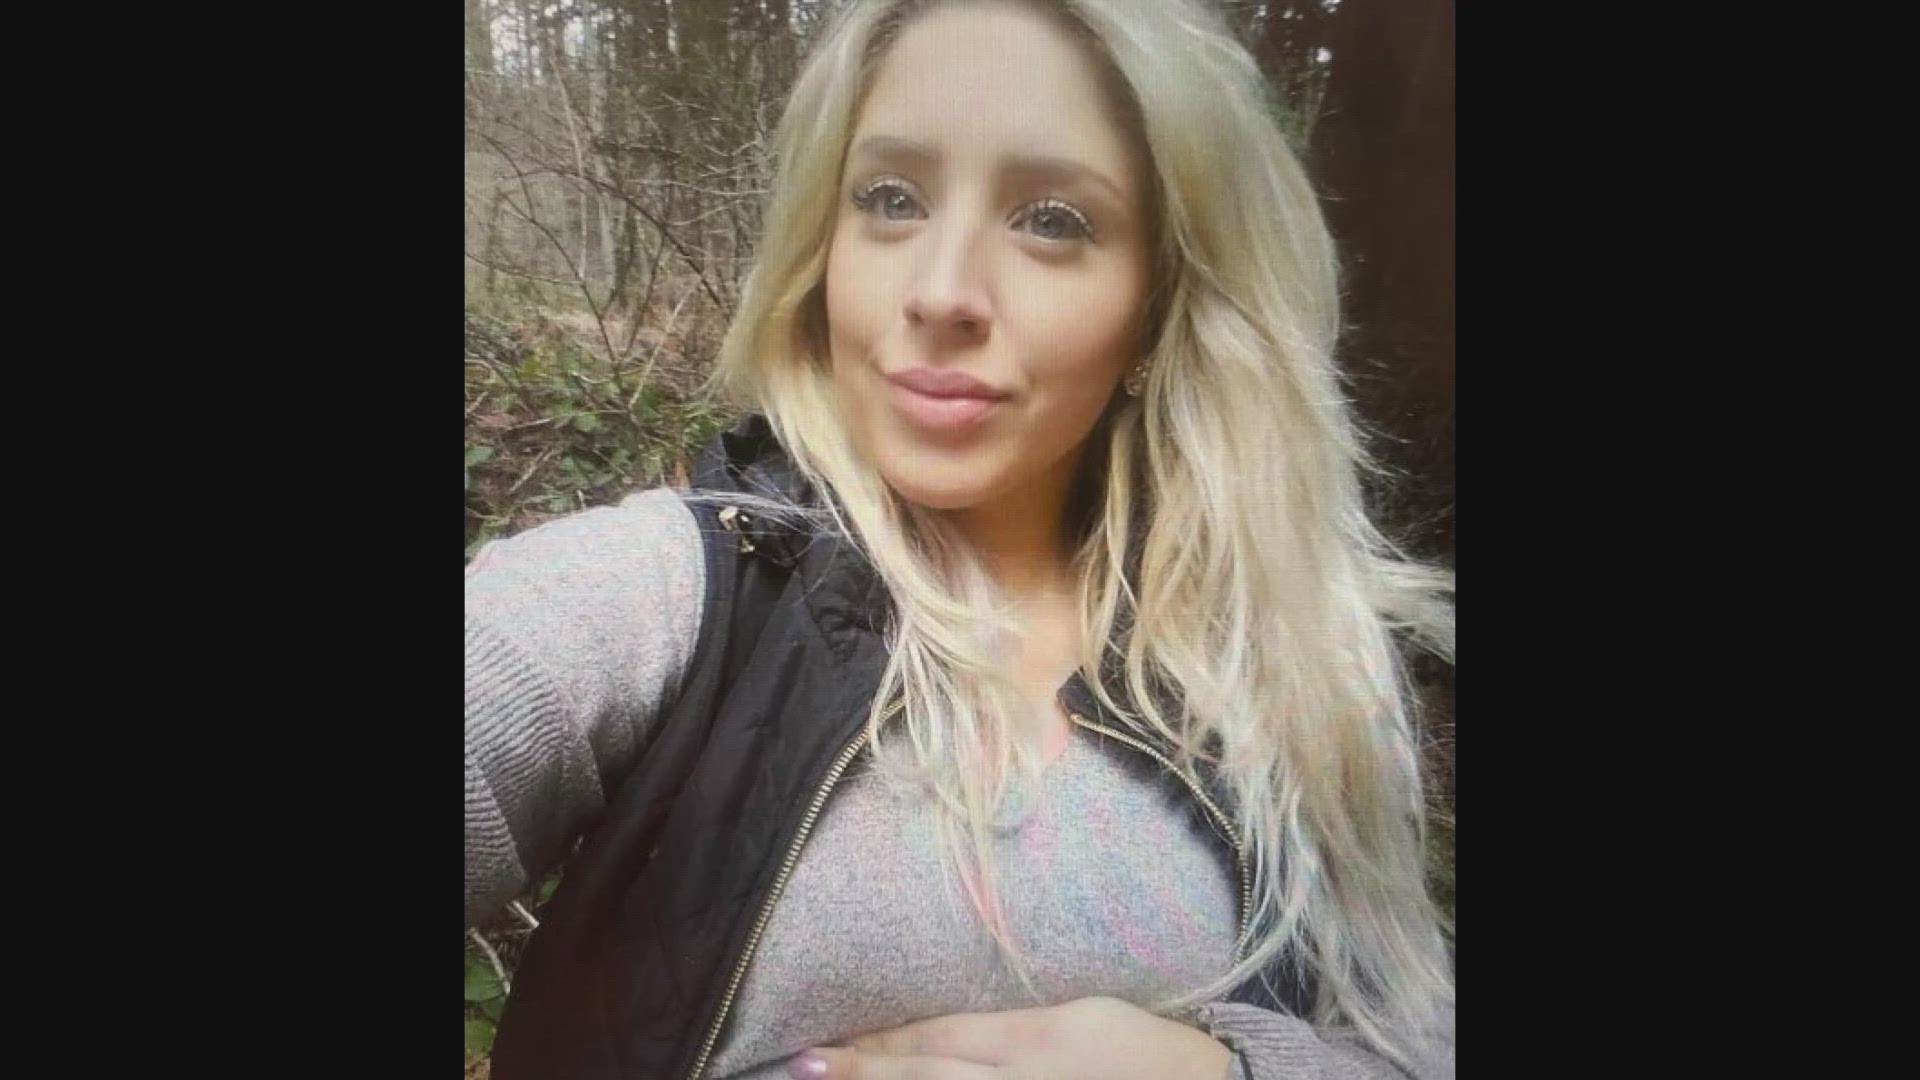 Vancouver police say 31-year-old Kailee Wheeless hasn't been seen since early May. Wheeless, who is 8 months pregnant, is 5'7" and weighs 150 pounds.